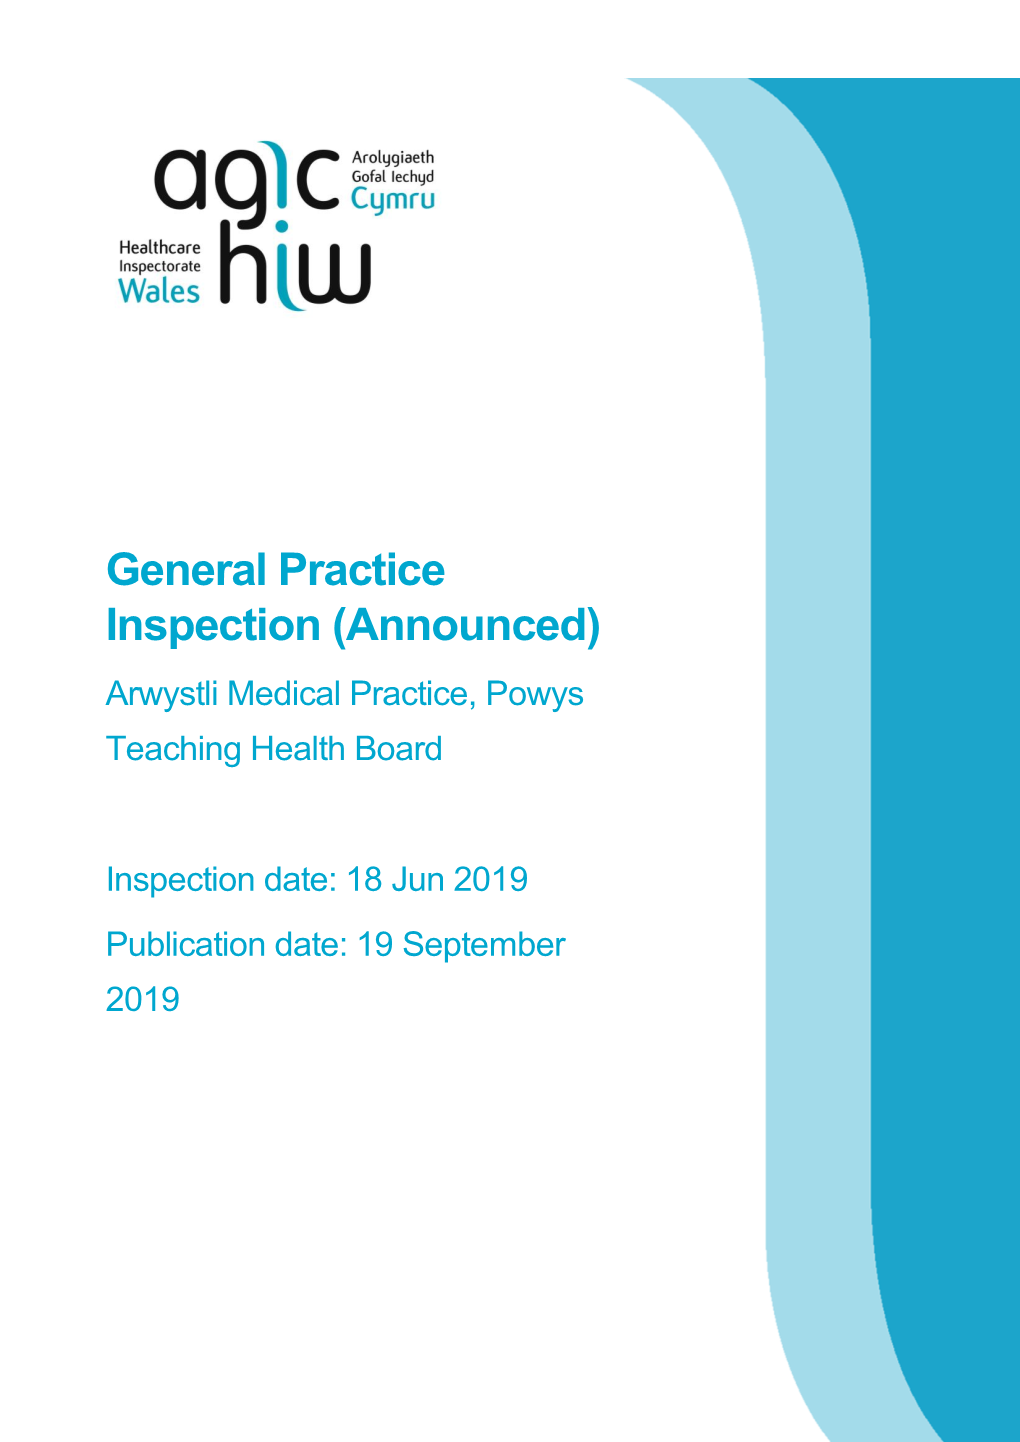 General Practice Inspection (Announced) Arwystli Medical Practice, Powys Teaching Health Board